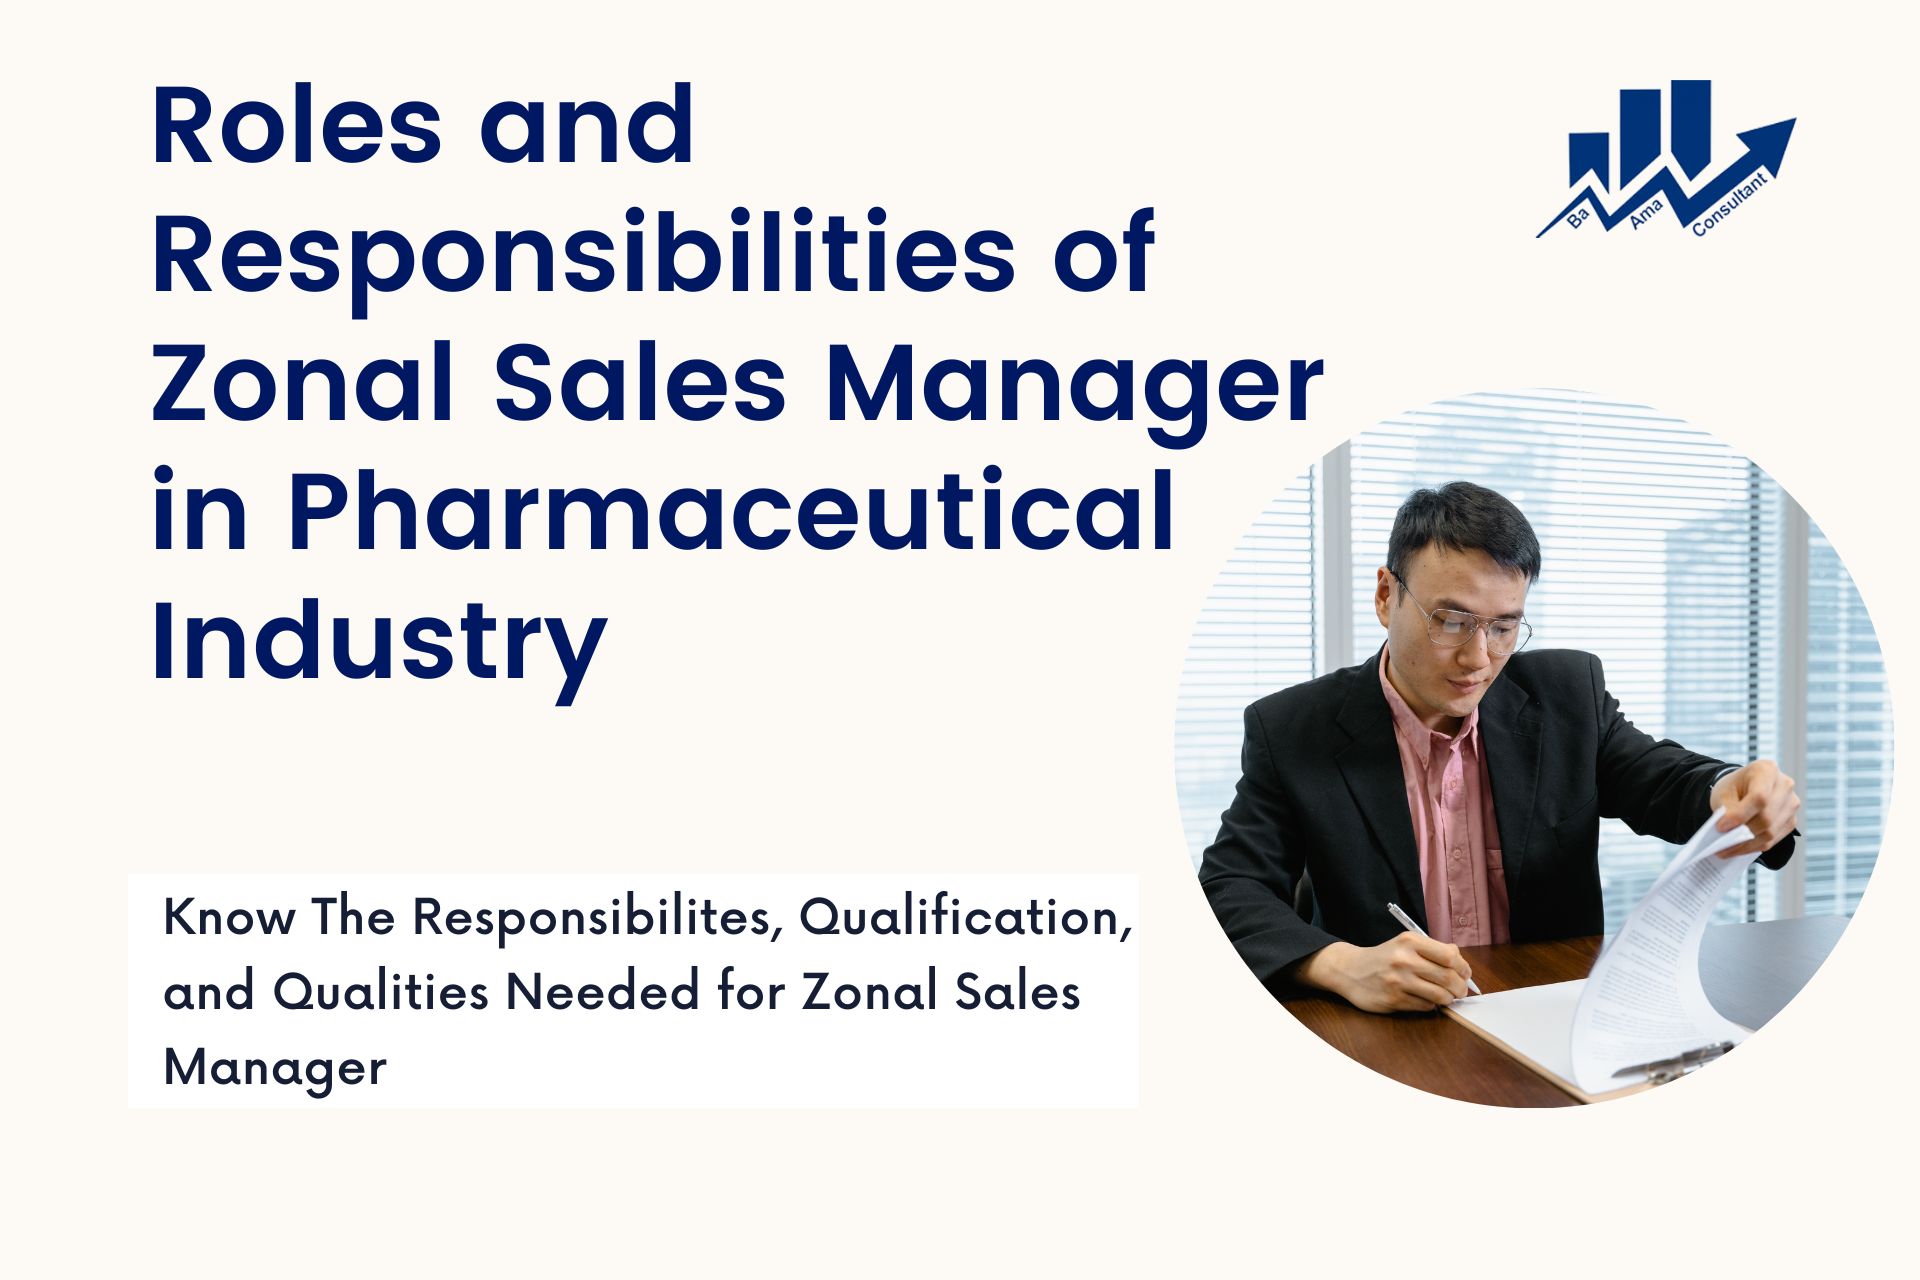 Roles and Responsibilities of Zonal Sales Manager in Pharma